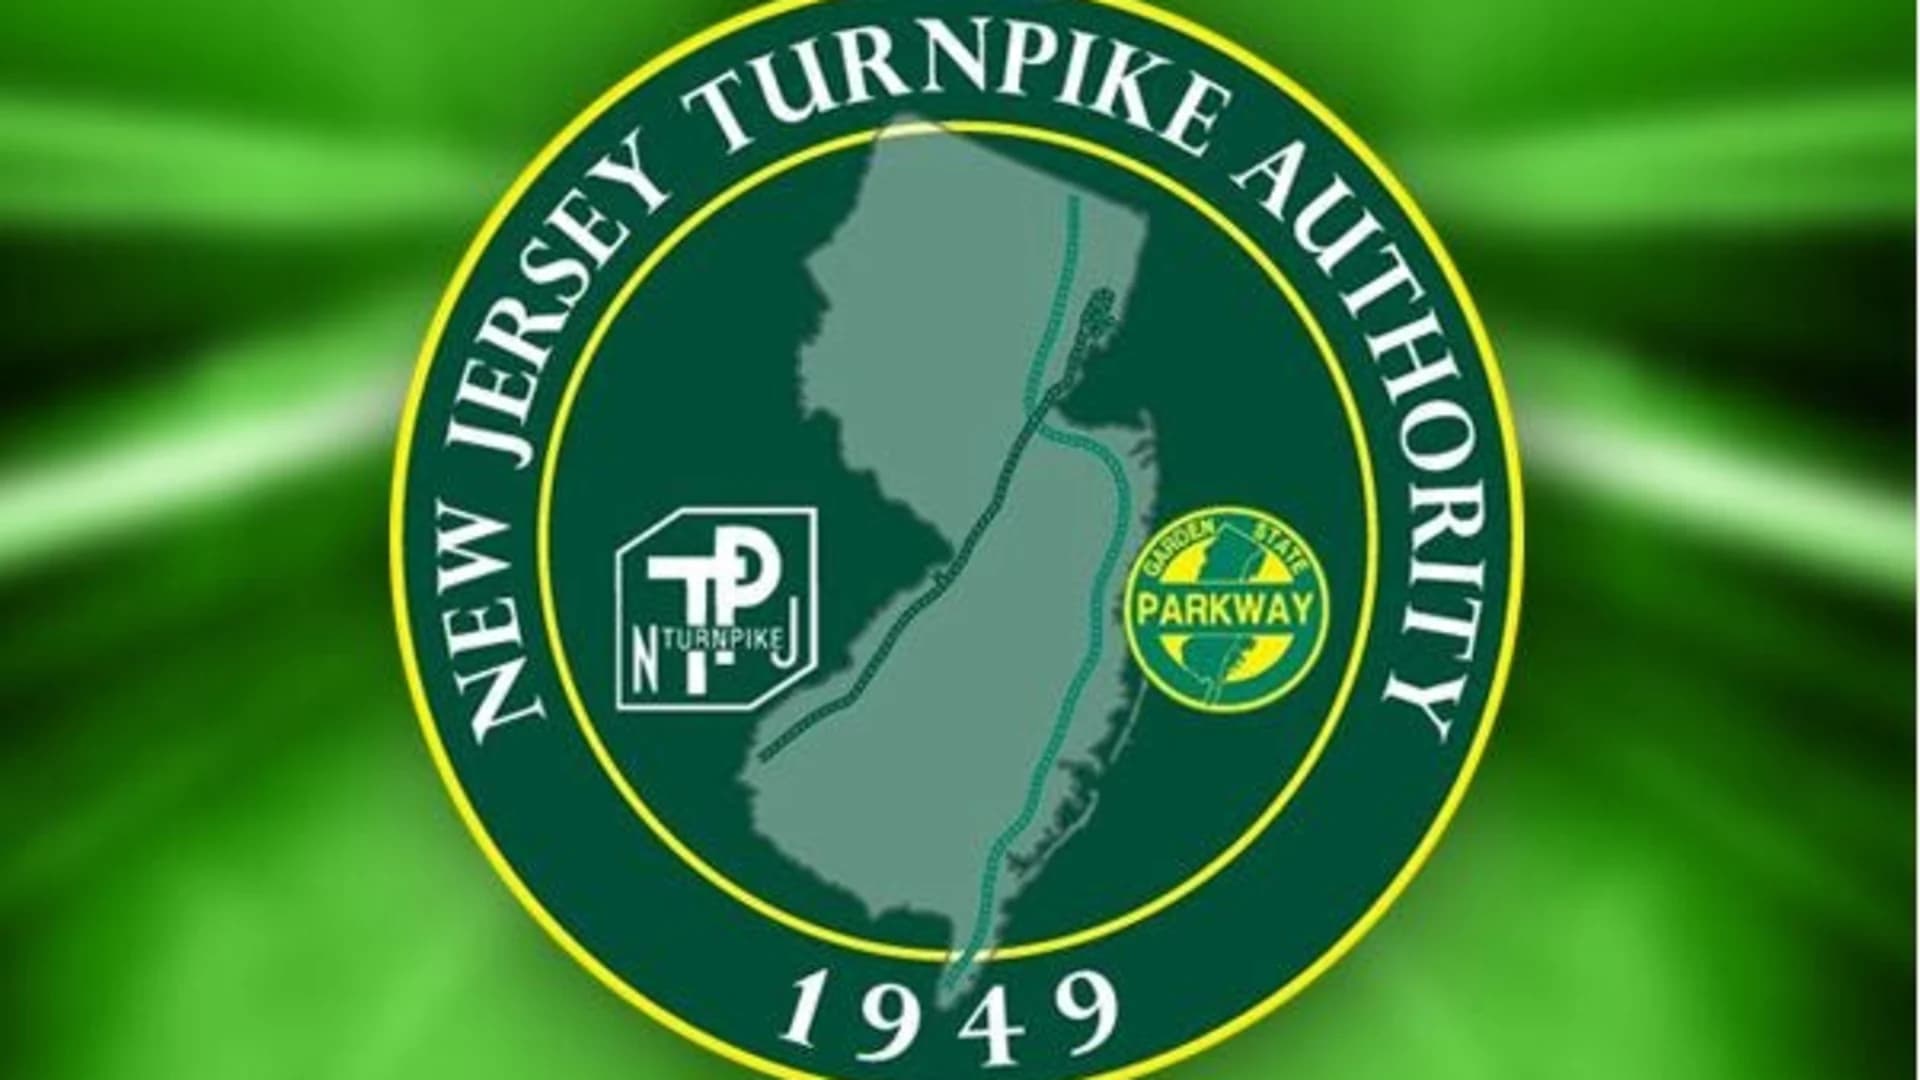 Turnpike Authority: No toll increases in 2020 for Parkway, Turnpike drivers